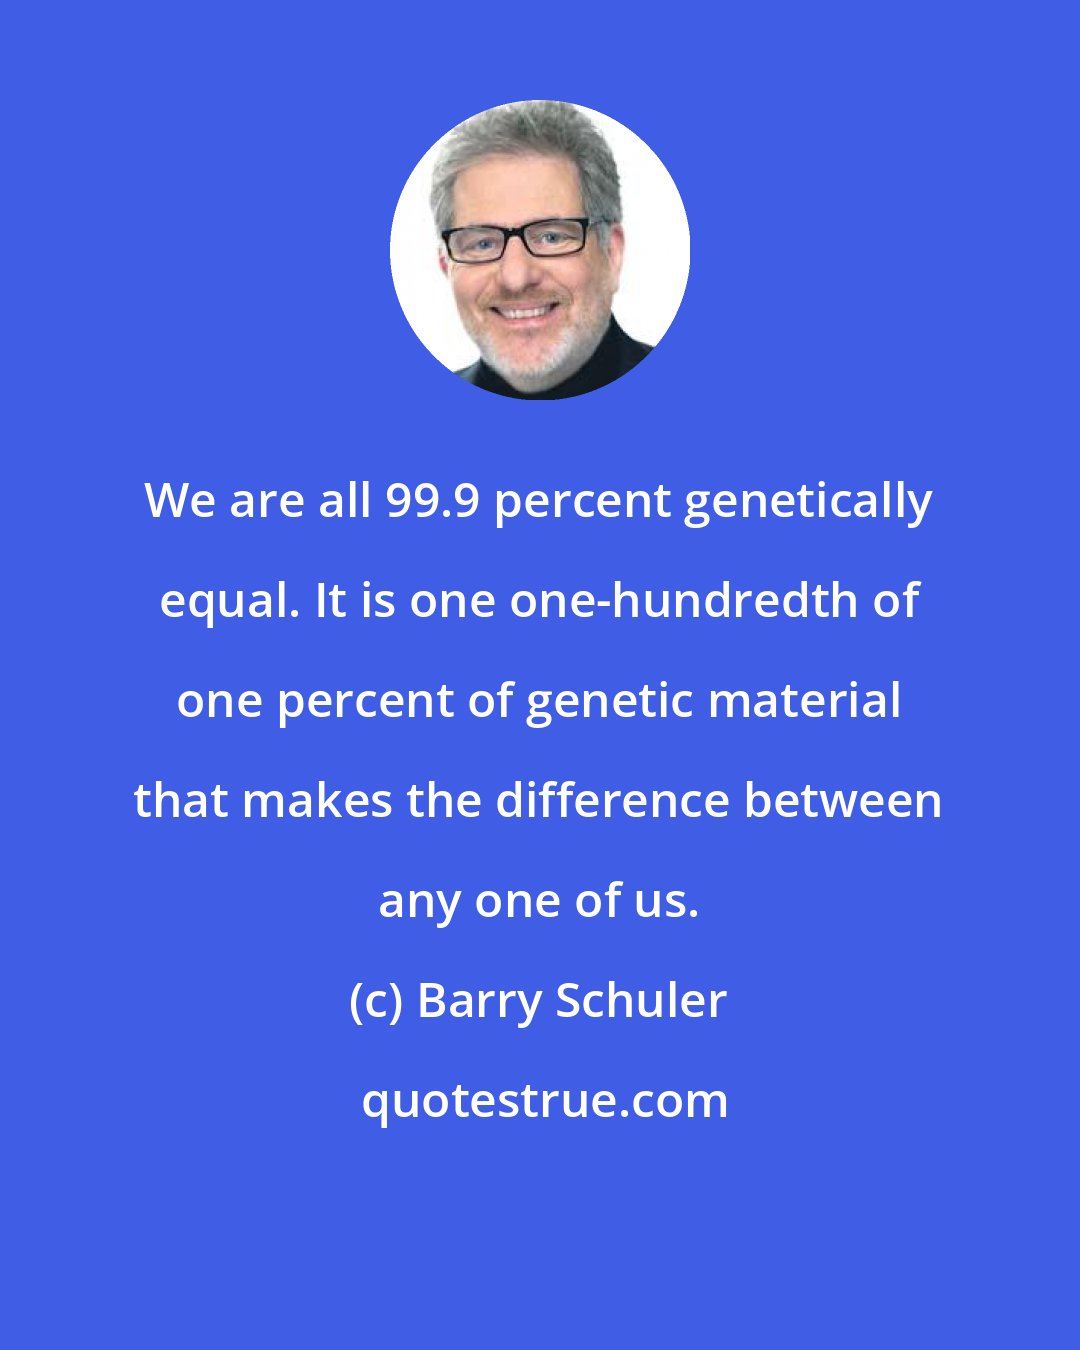 Barry Schuler: We are all 99.9 percent genetically equal. It is one one-hundredth of one percent of genetic material that makes the difference between any one of us.